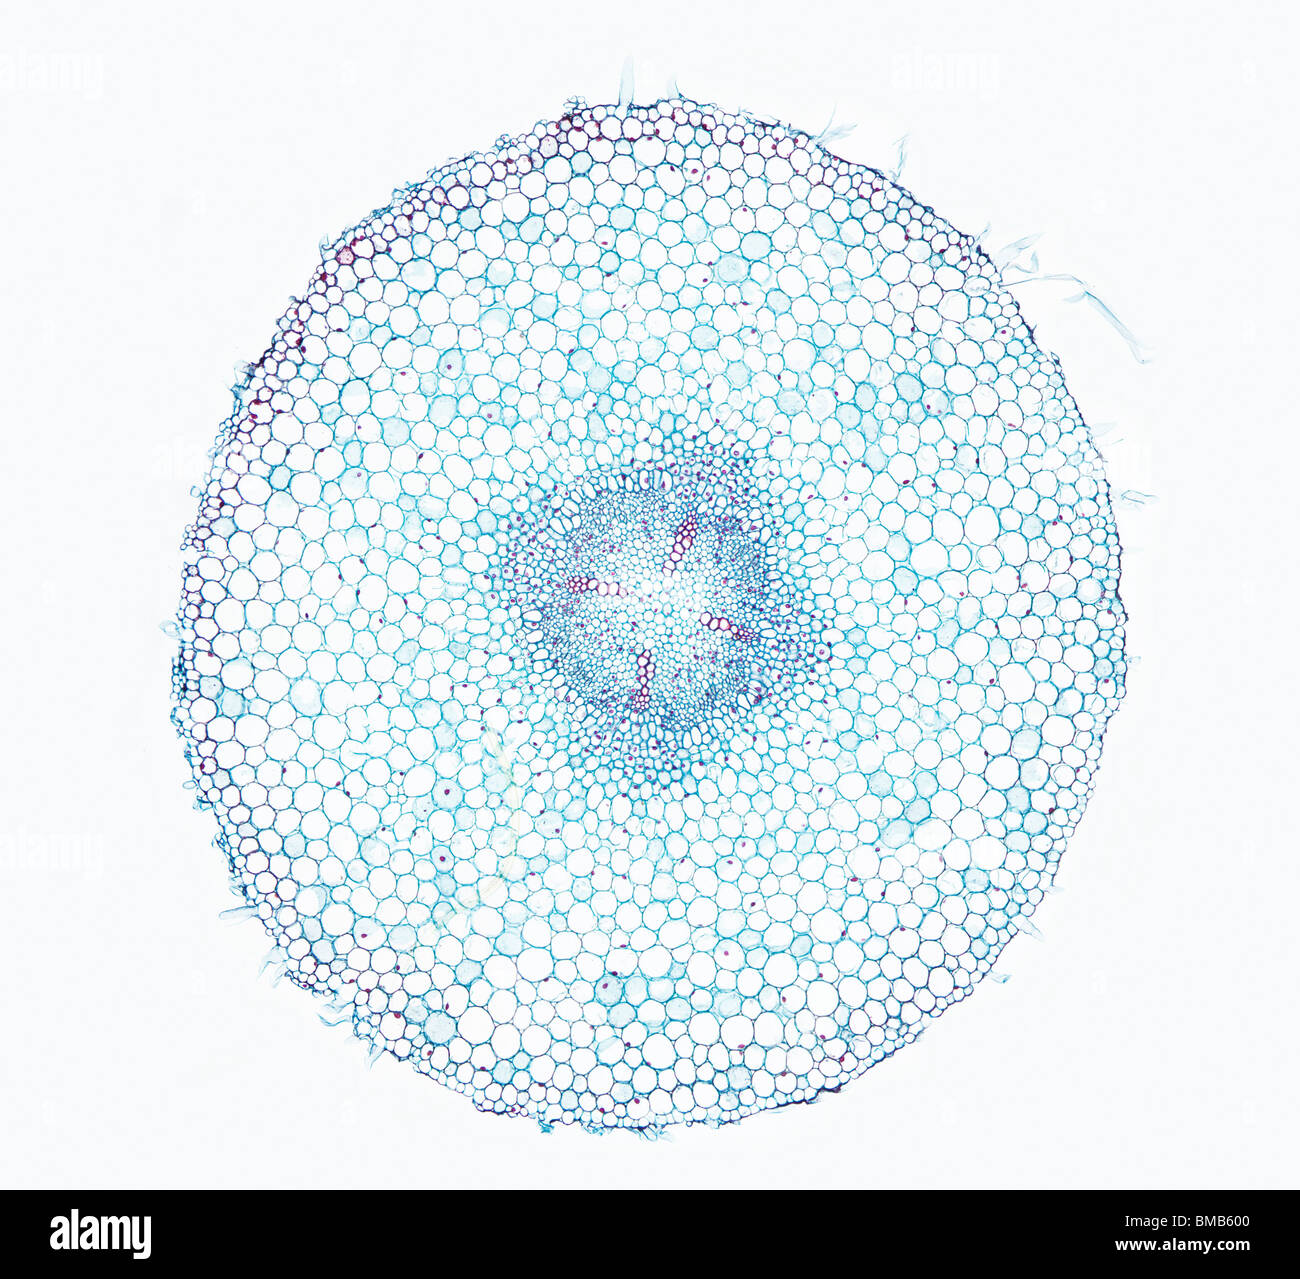 Vicia Faba, young root, cross section Stock Photo